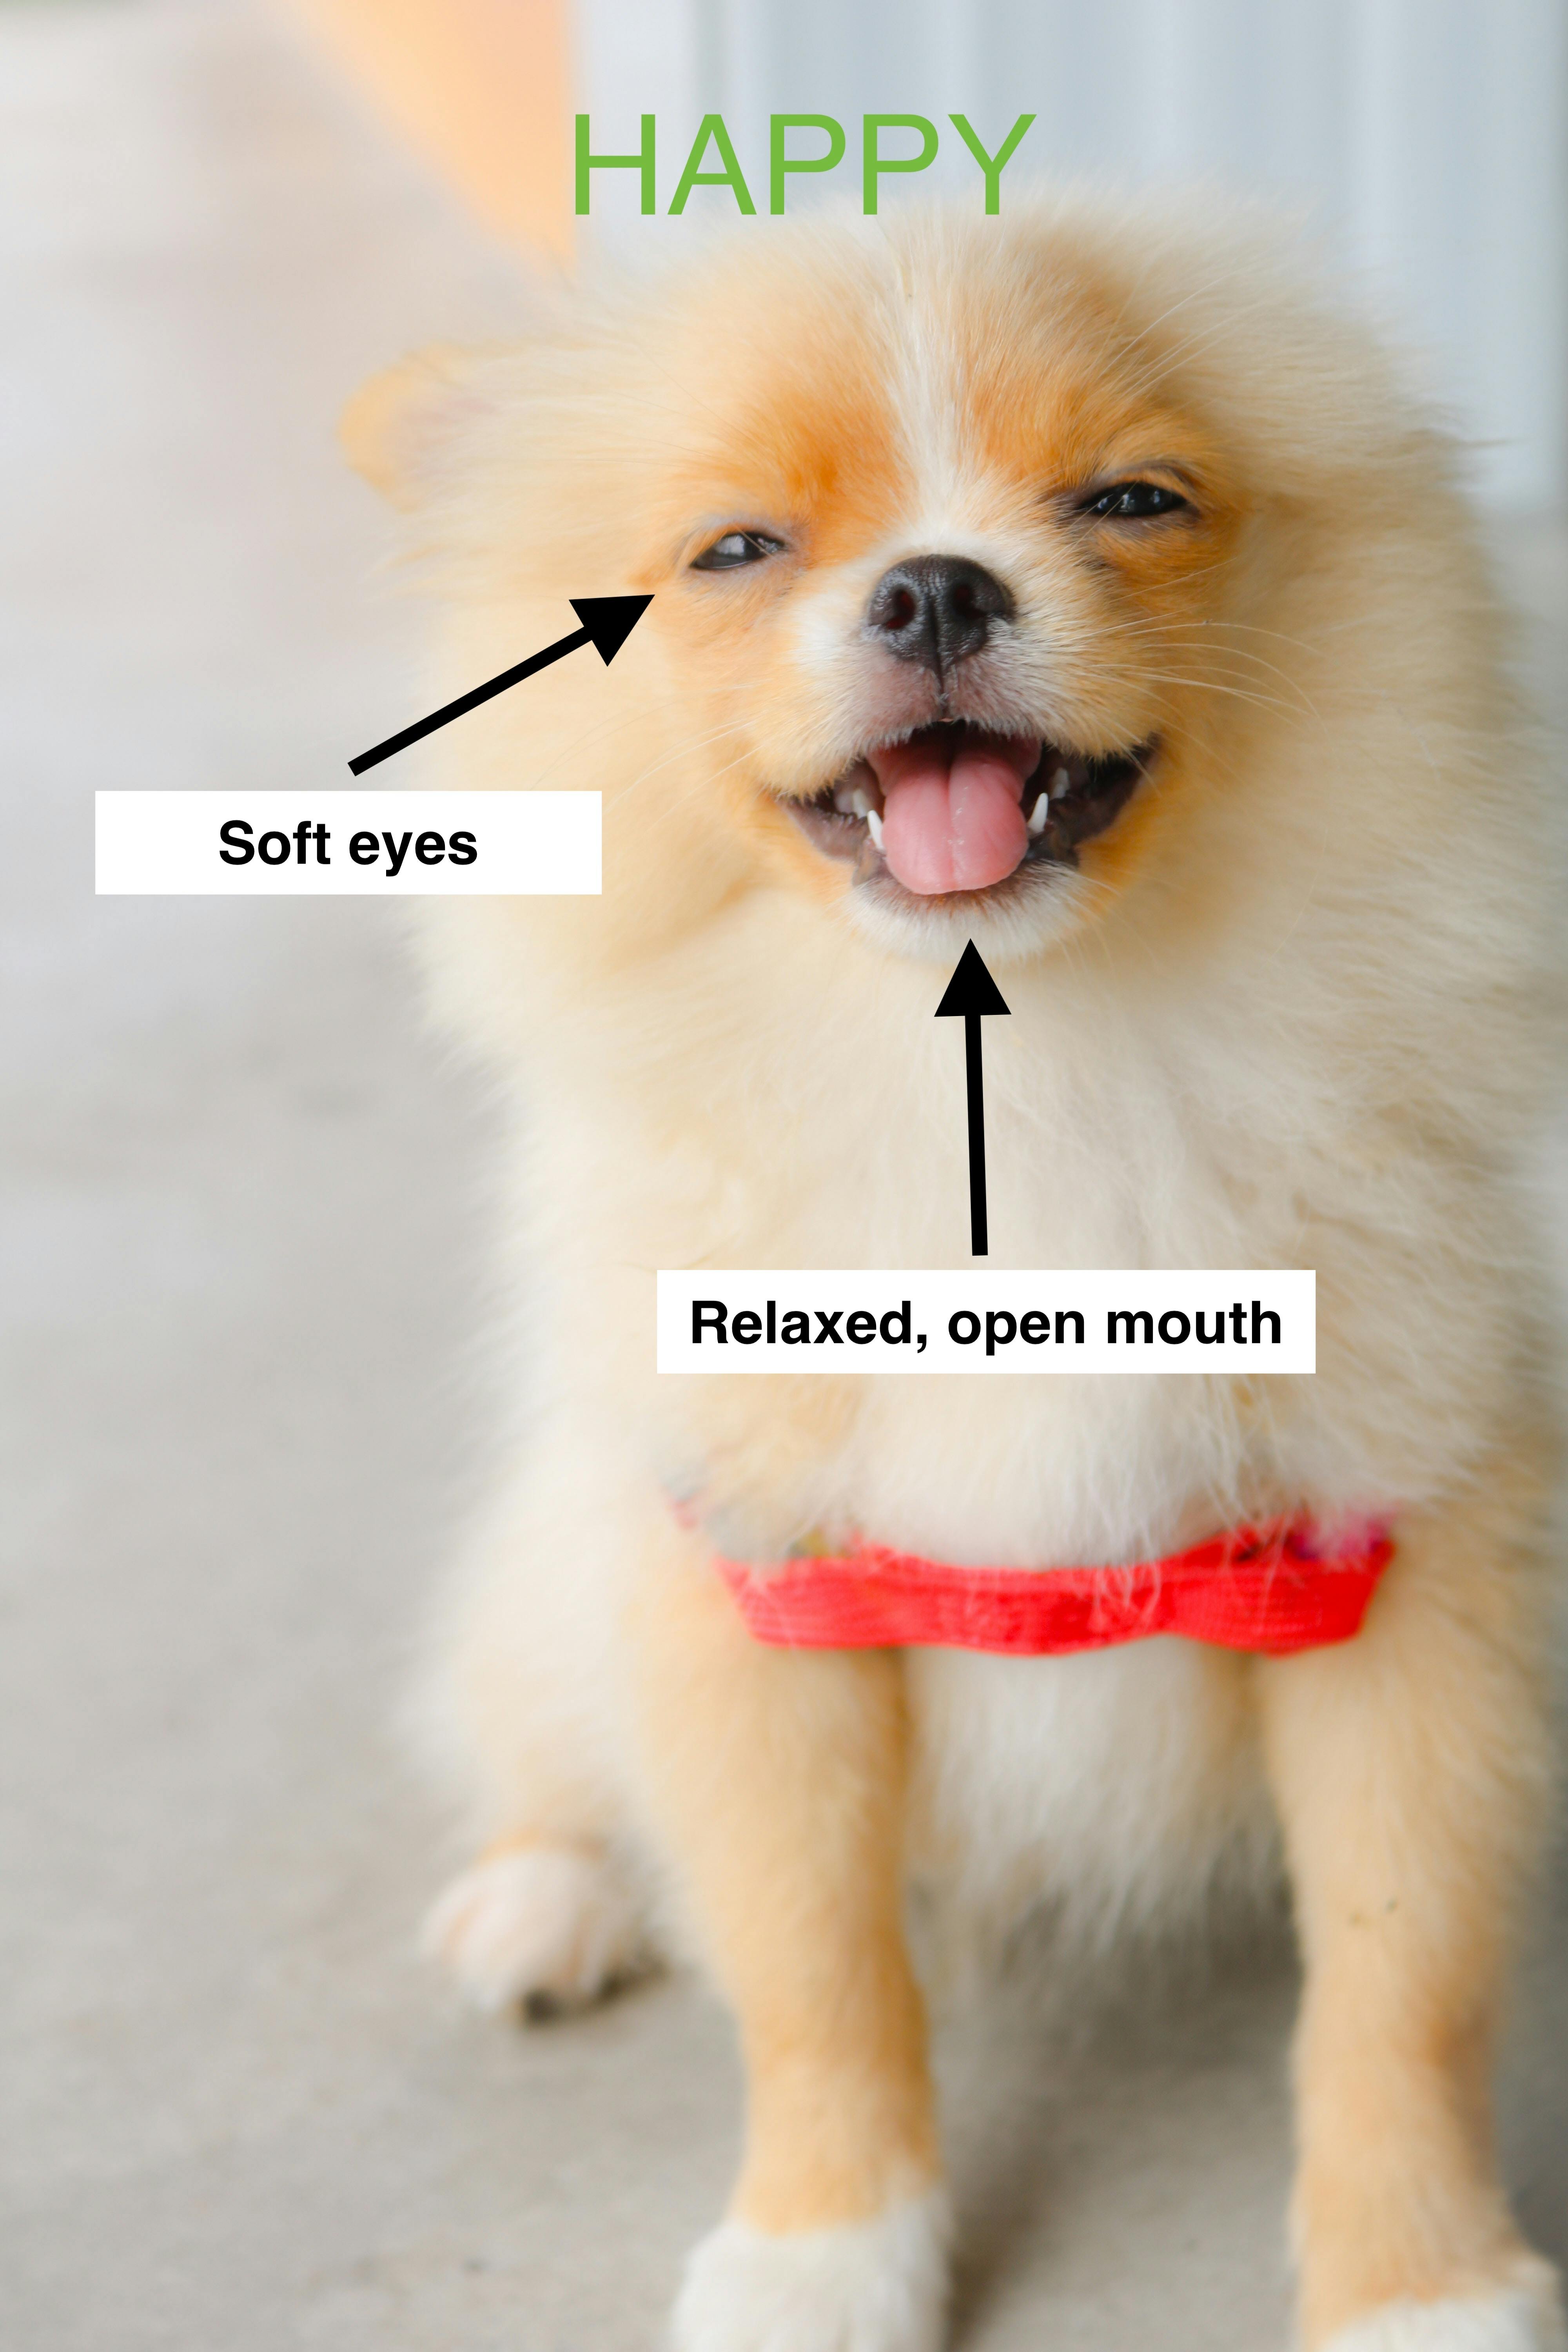 A happy pomeranian dog sits with words overlaying the image pointing out her happy body language